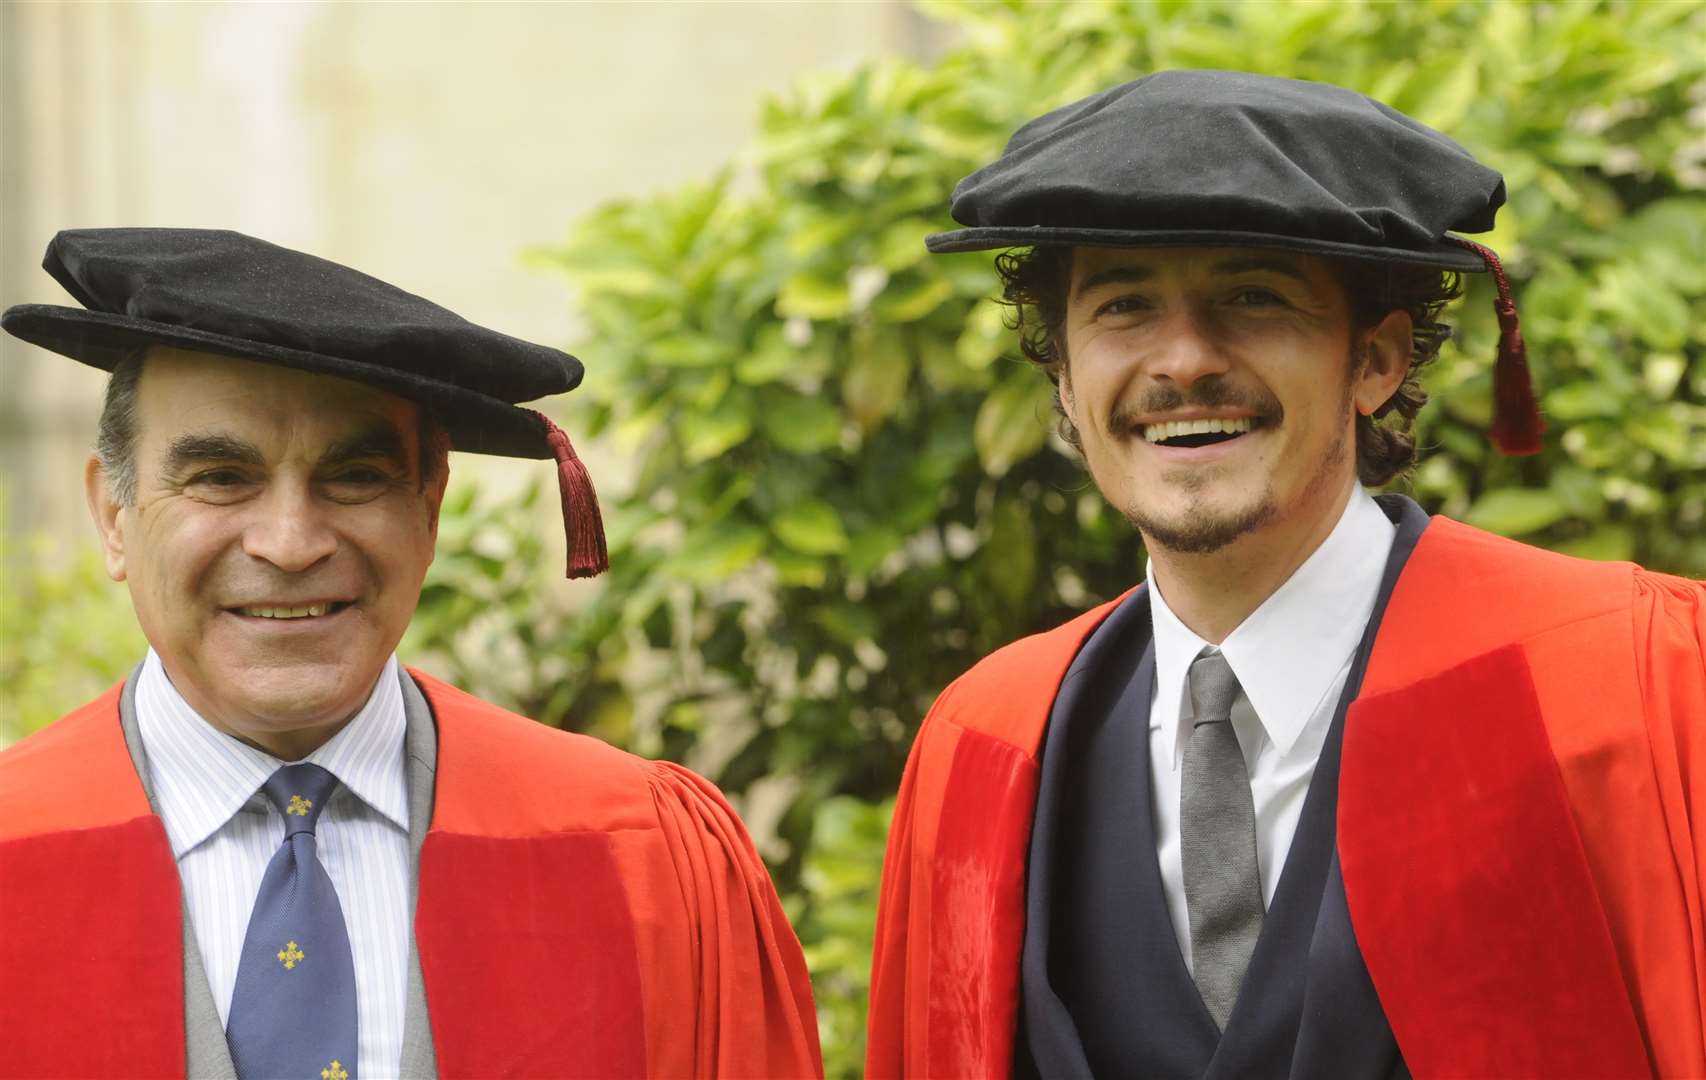 Orlando Bloom and David Suchet receive honorary degrees from the University of Kent at Canterbury Cathedral